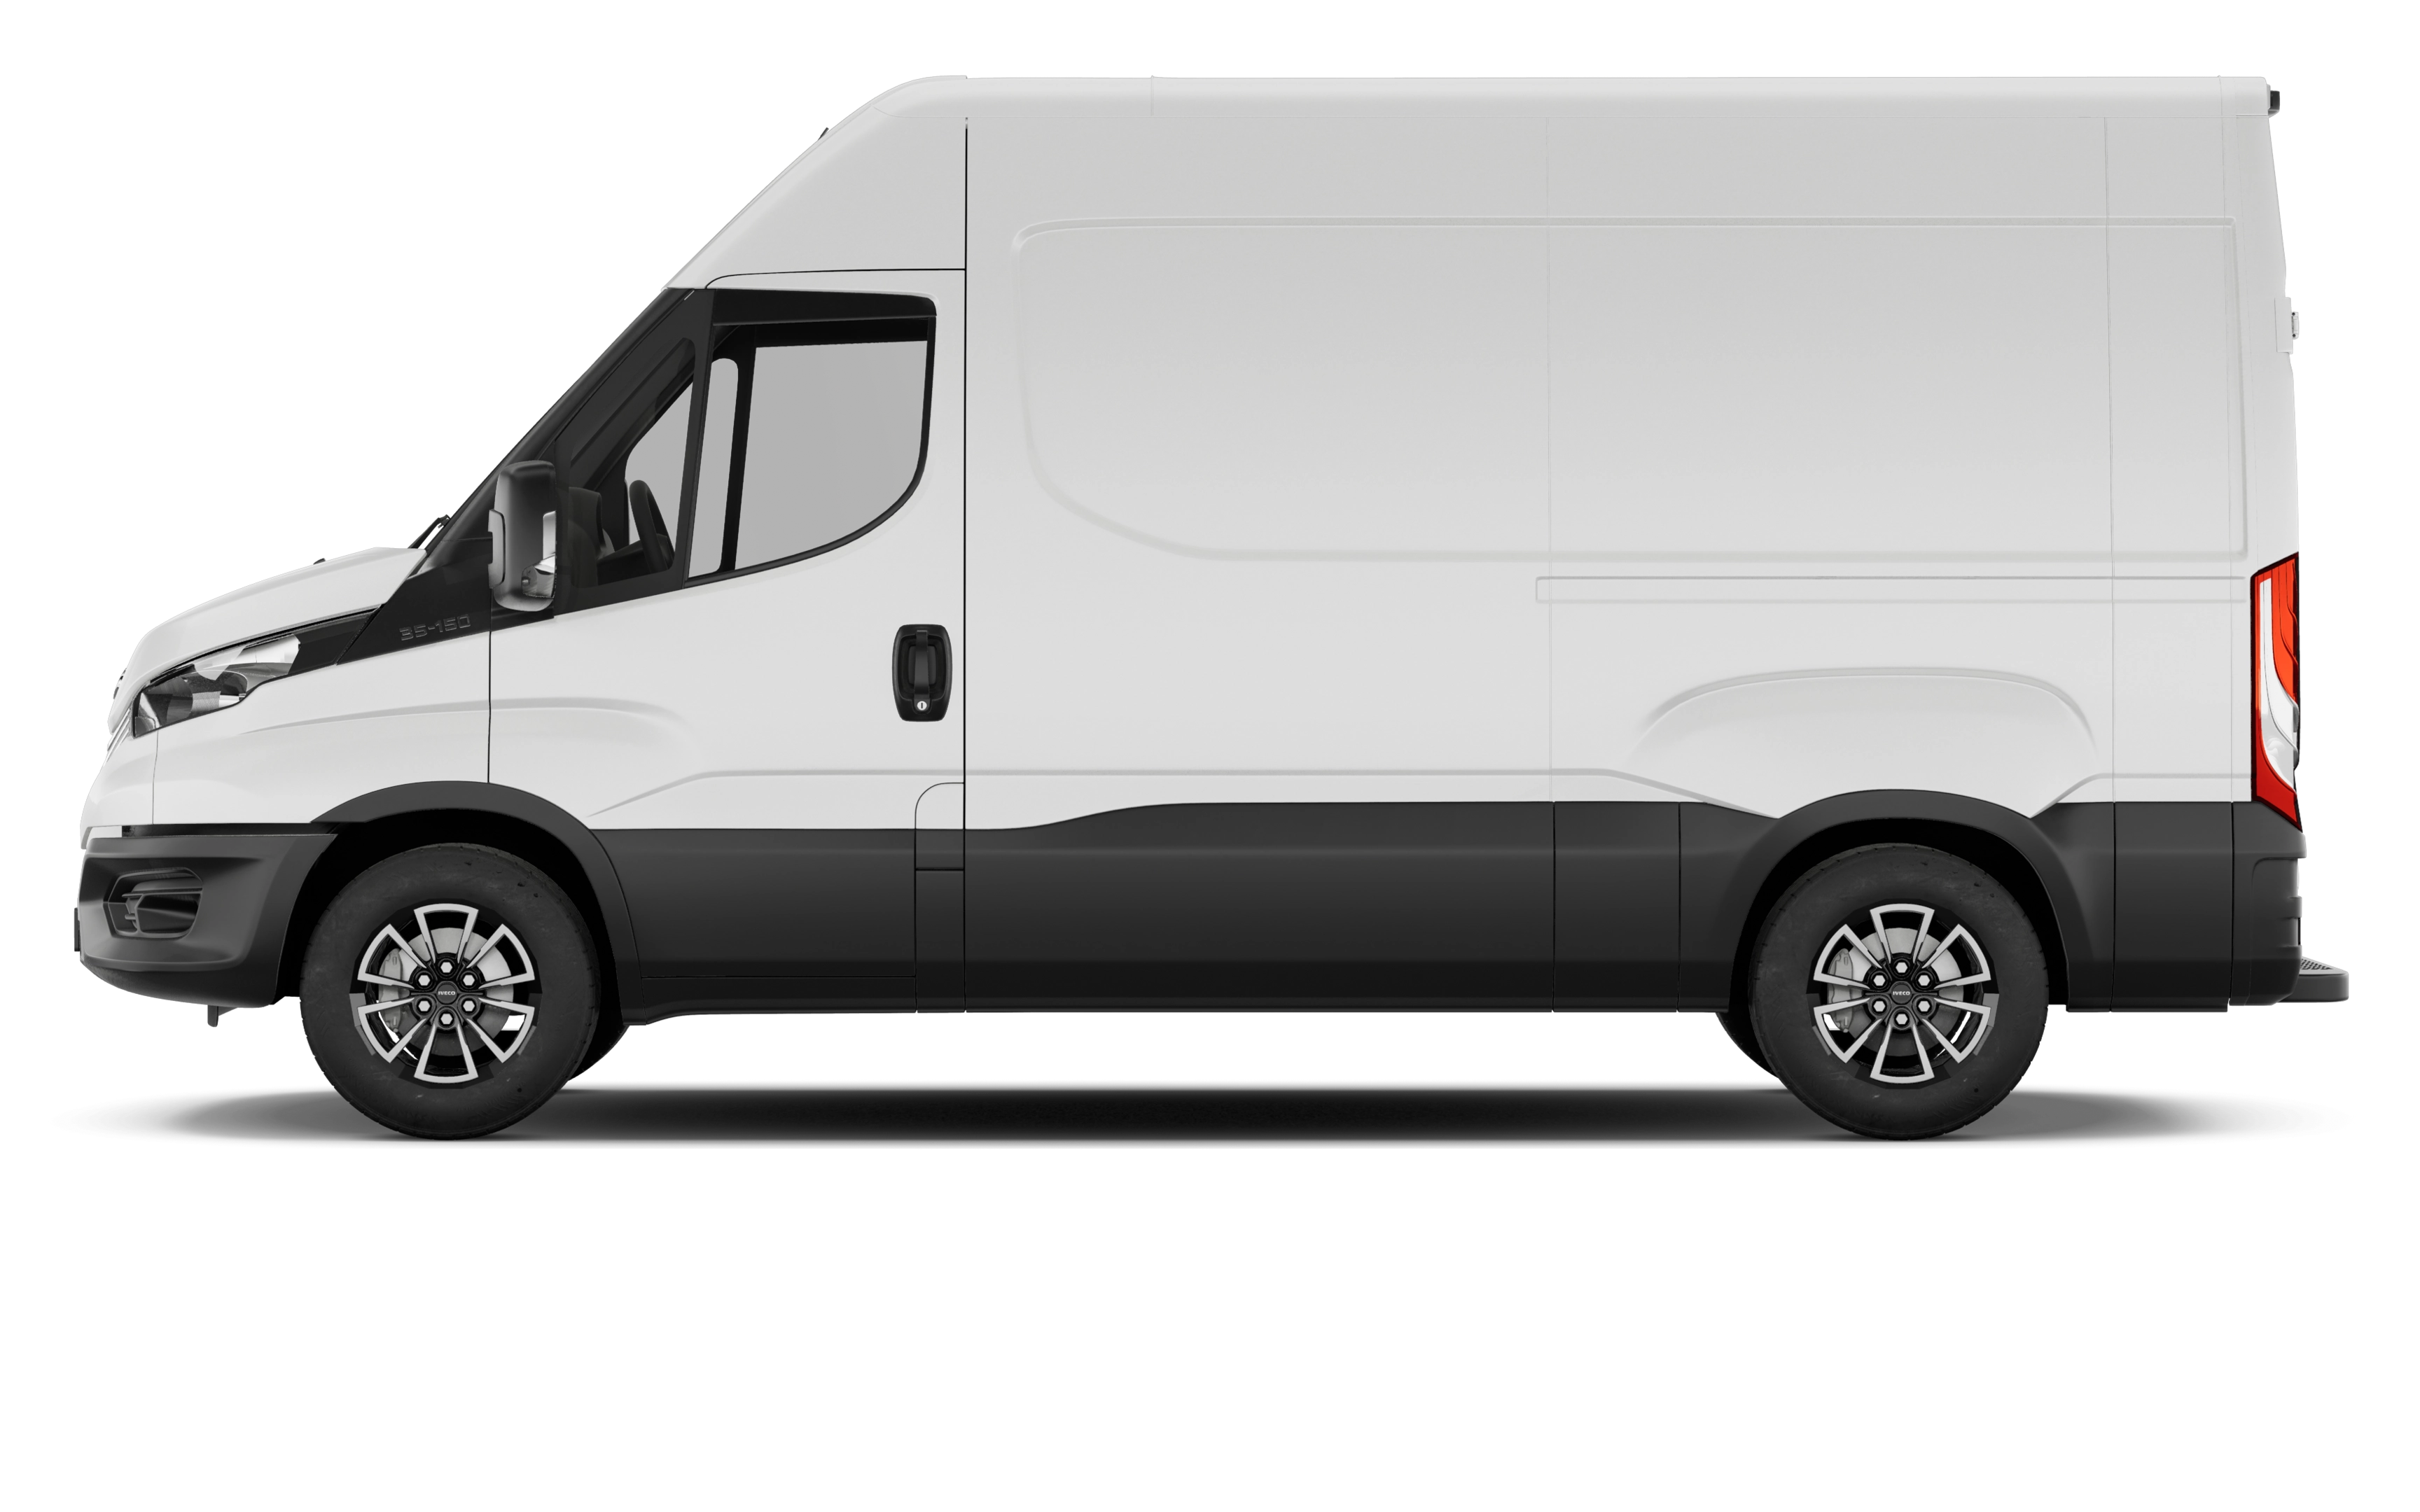 Iveco edaily 35s14 electric 140kw 74kwh high roof van 4100 wb auto [22kw]